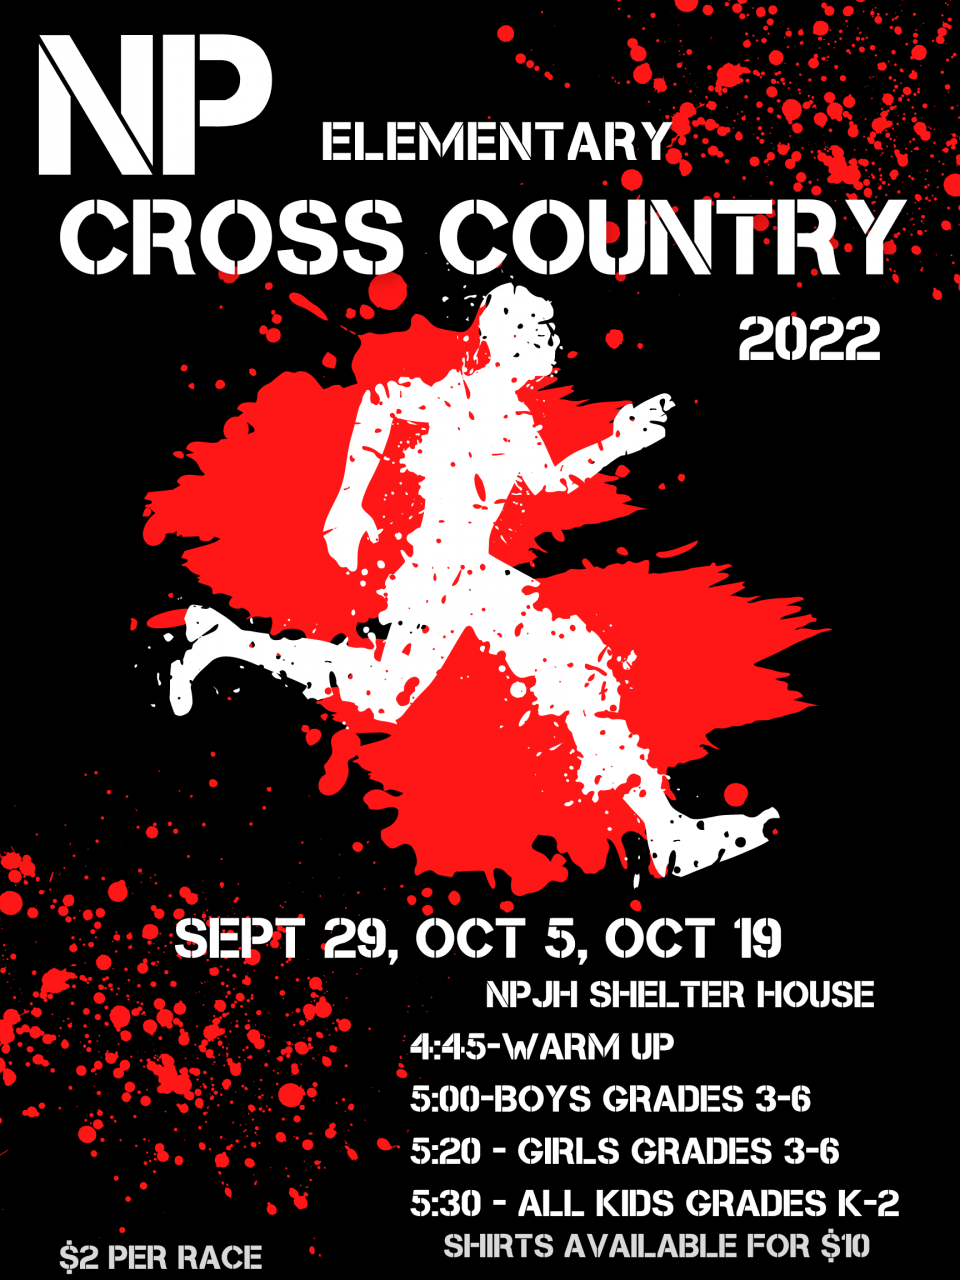 Elementary Cross Country